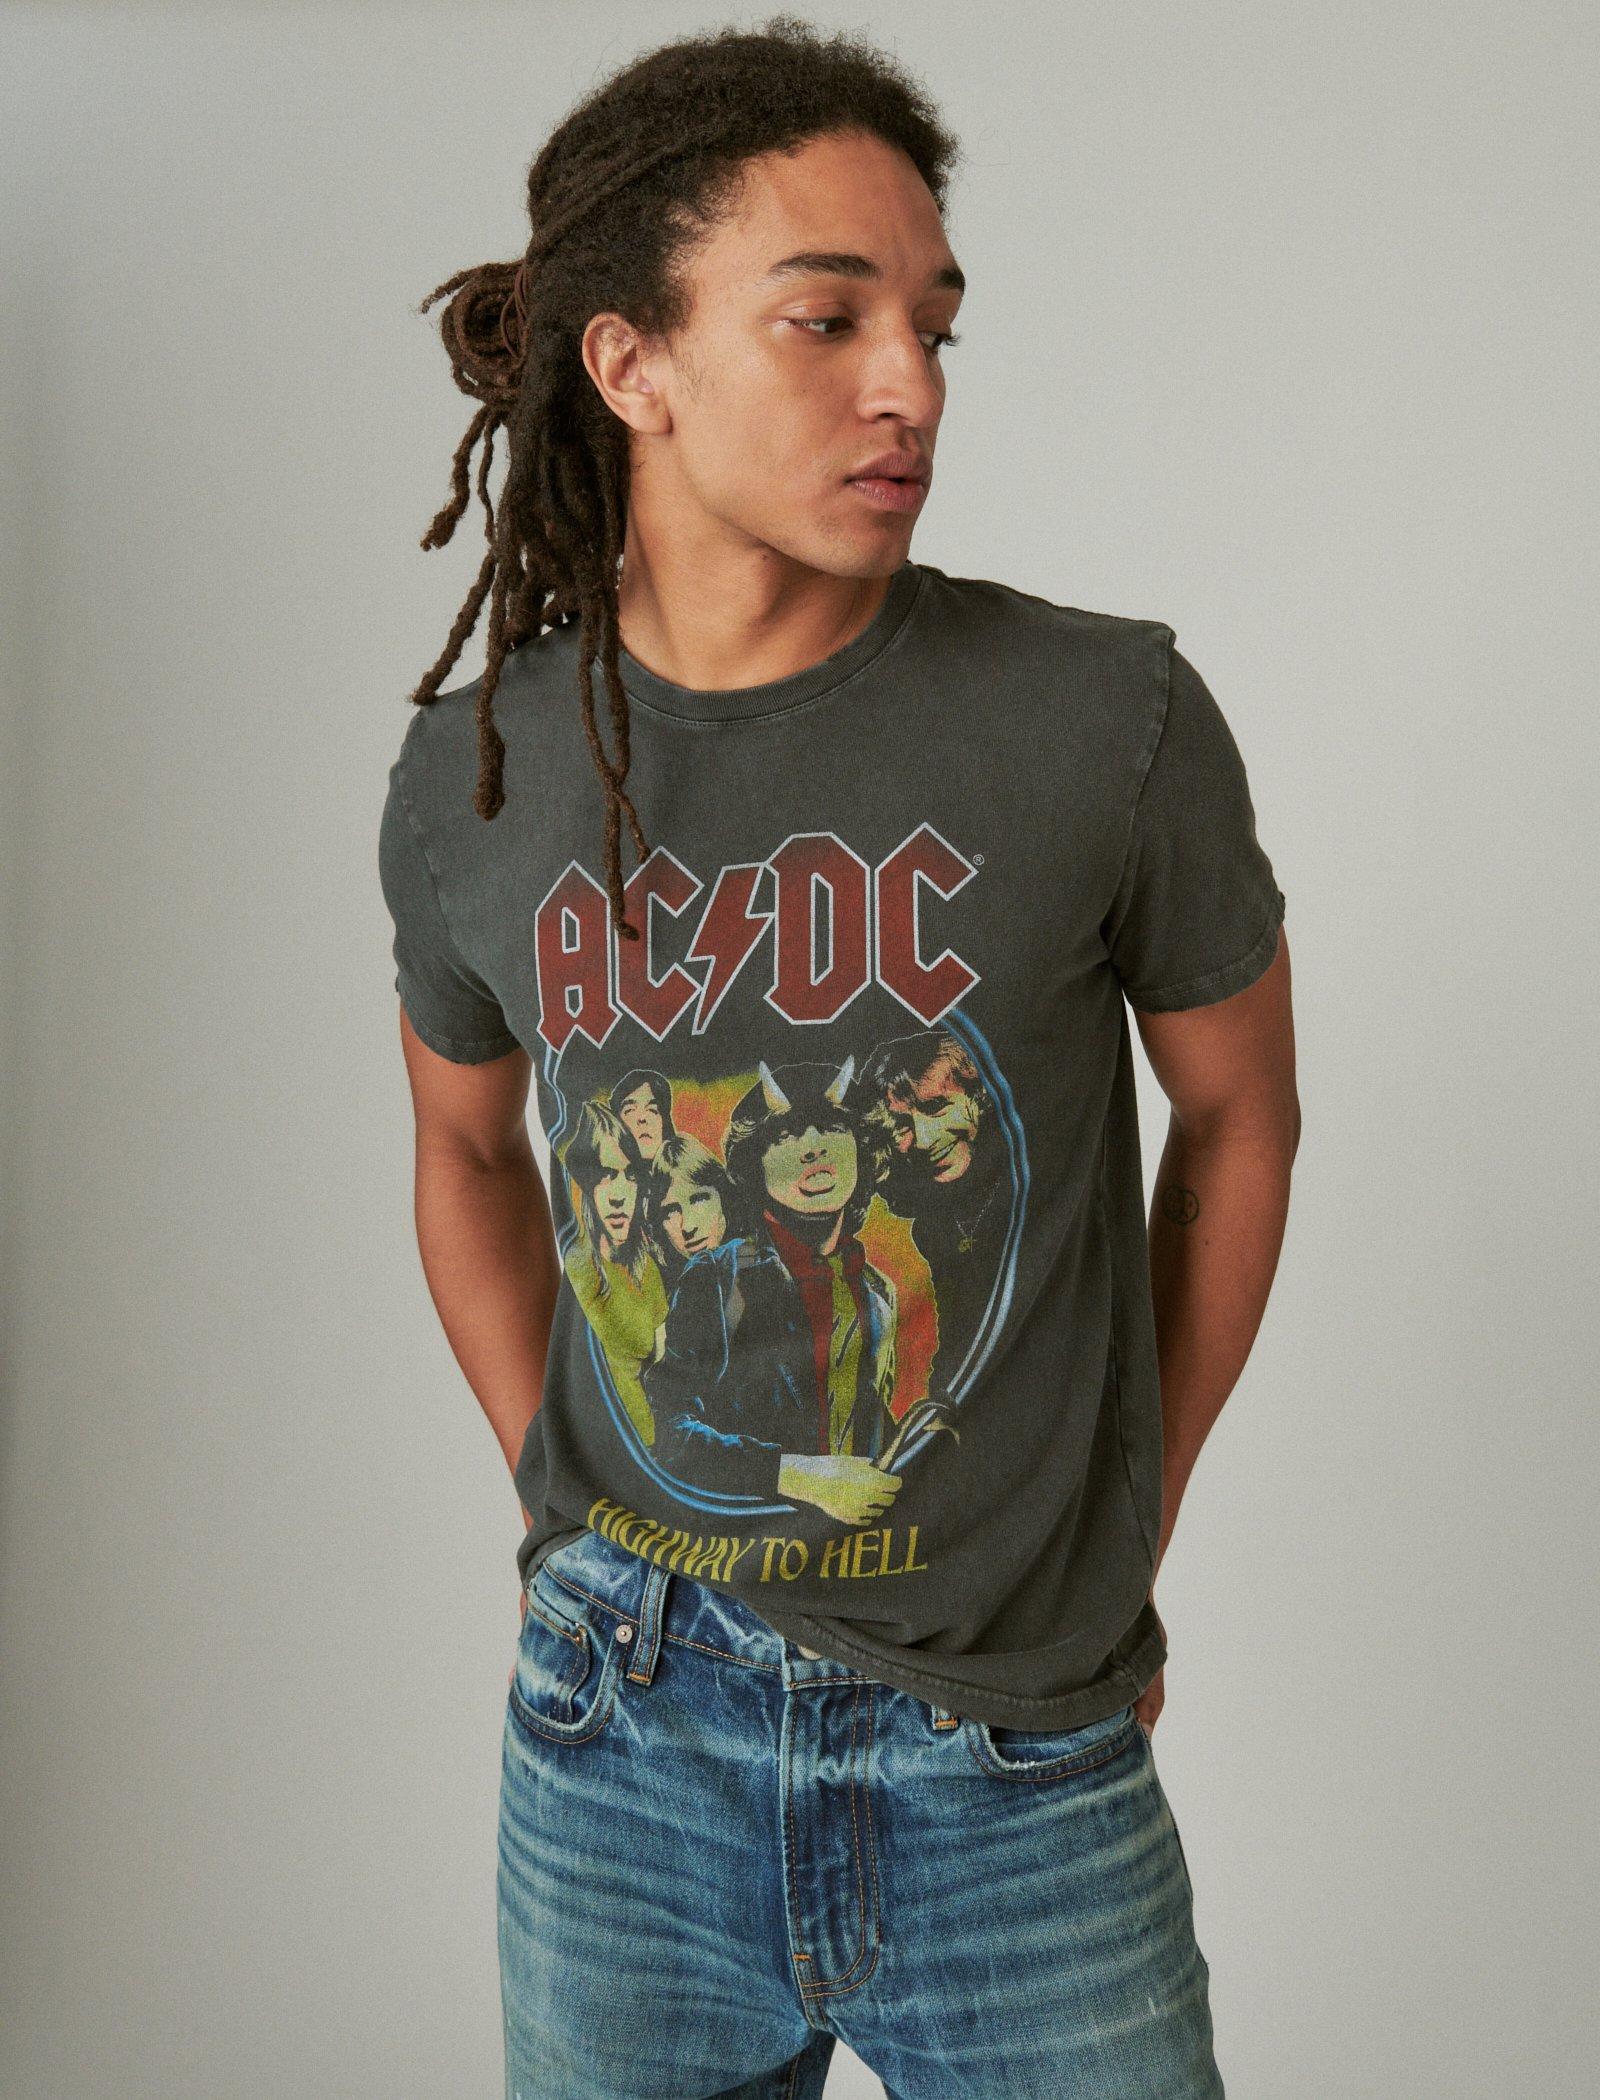 Lucky Brand Acdc Highway To Hell Graphic Tee - Men's Clothing Tops Shirts Tee Graphic T Shirts Jet Black